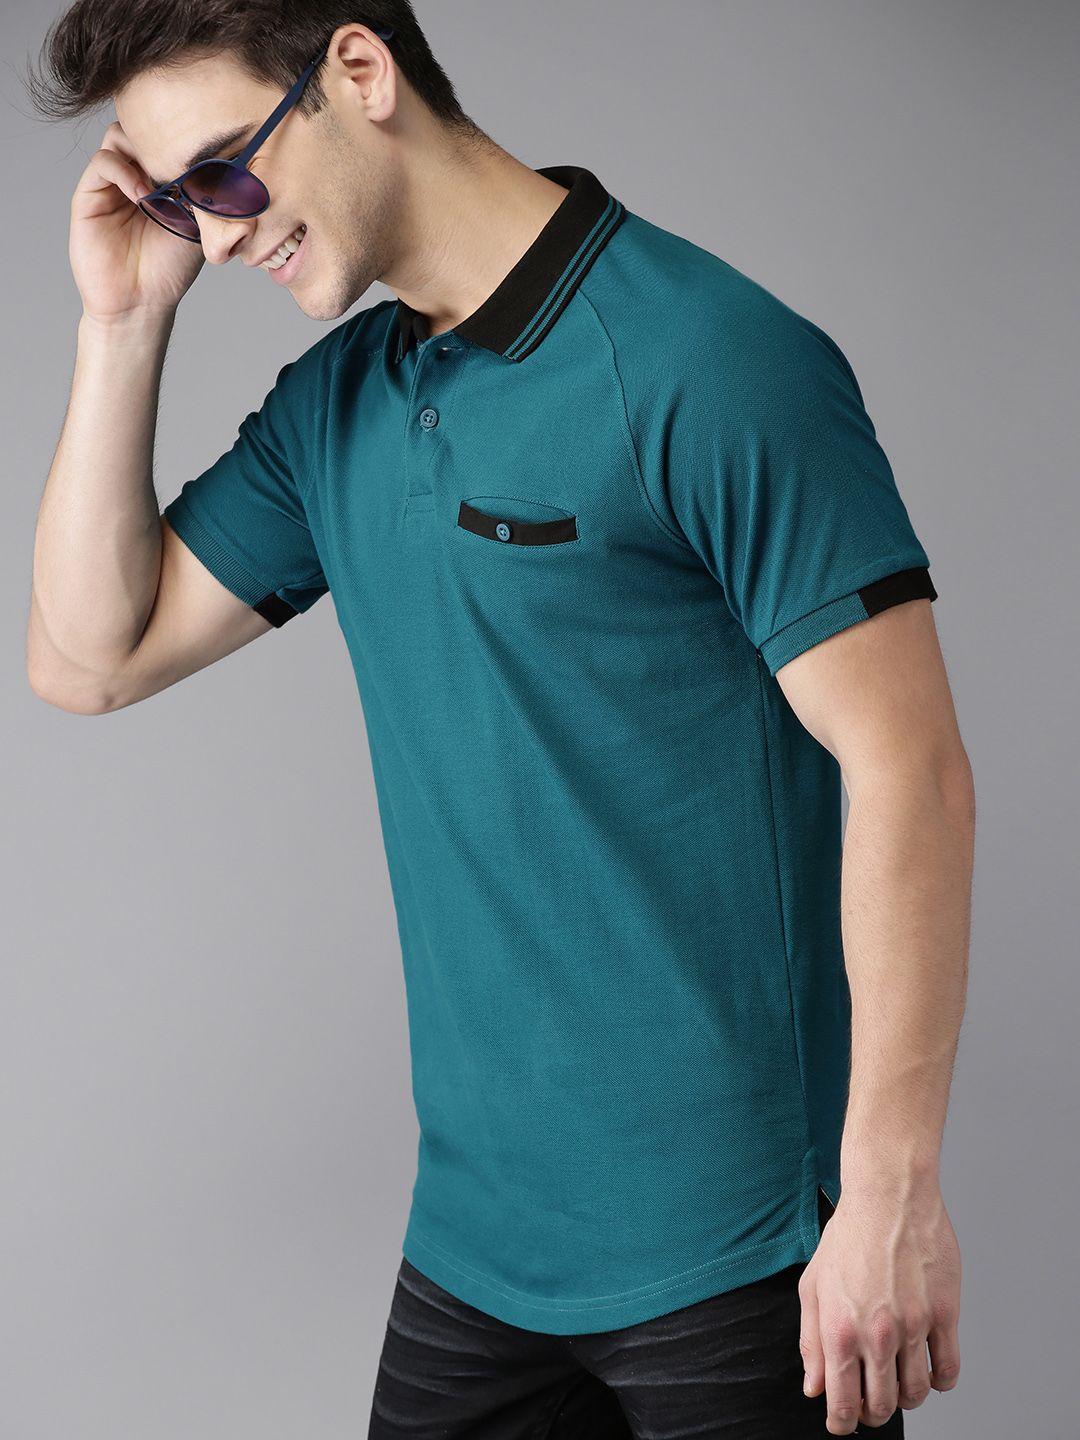 here&now men teal blue solid polo collar t-shirt